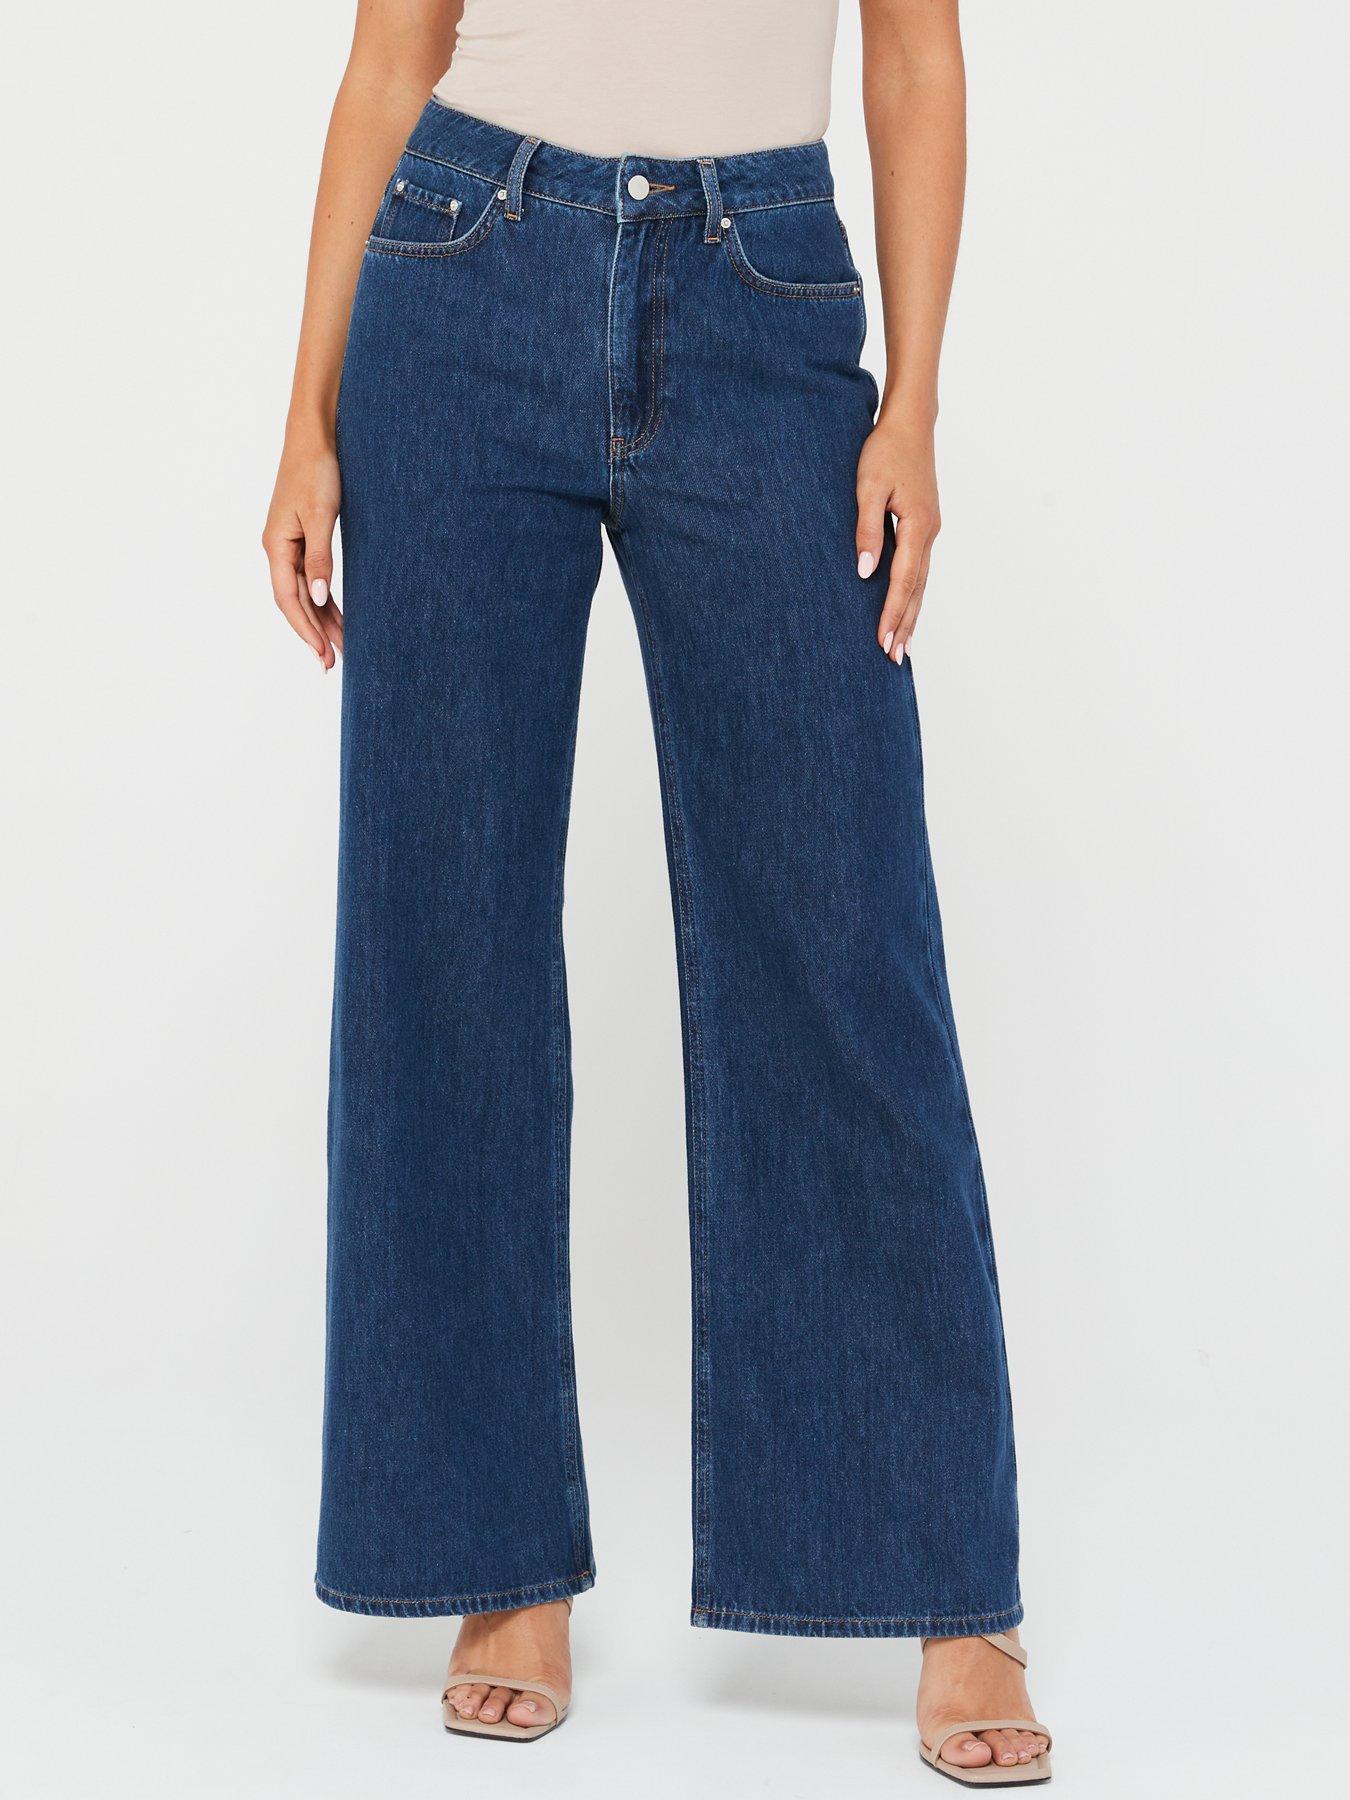 V by Very Relaxed Wide Leg Jeans - Dark Wash